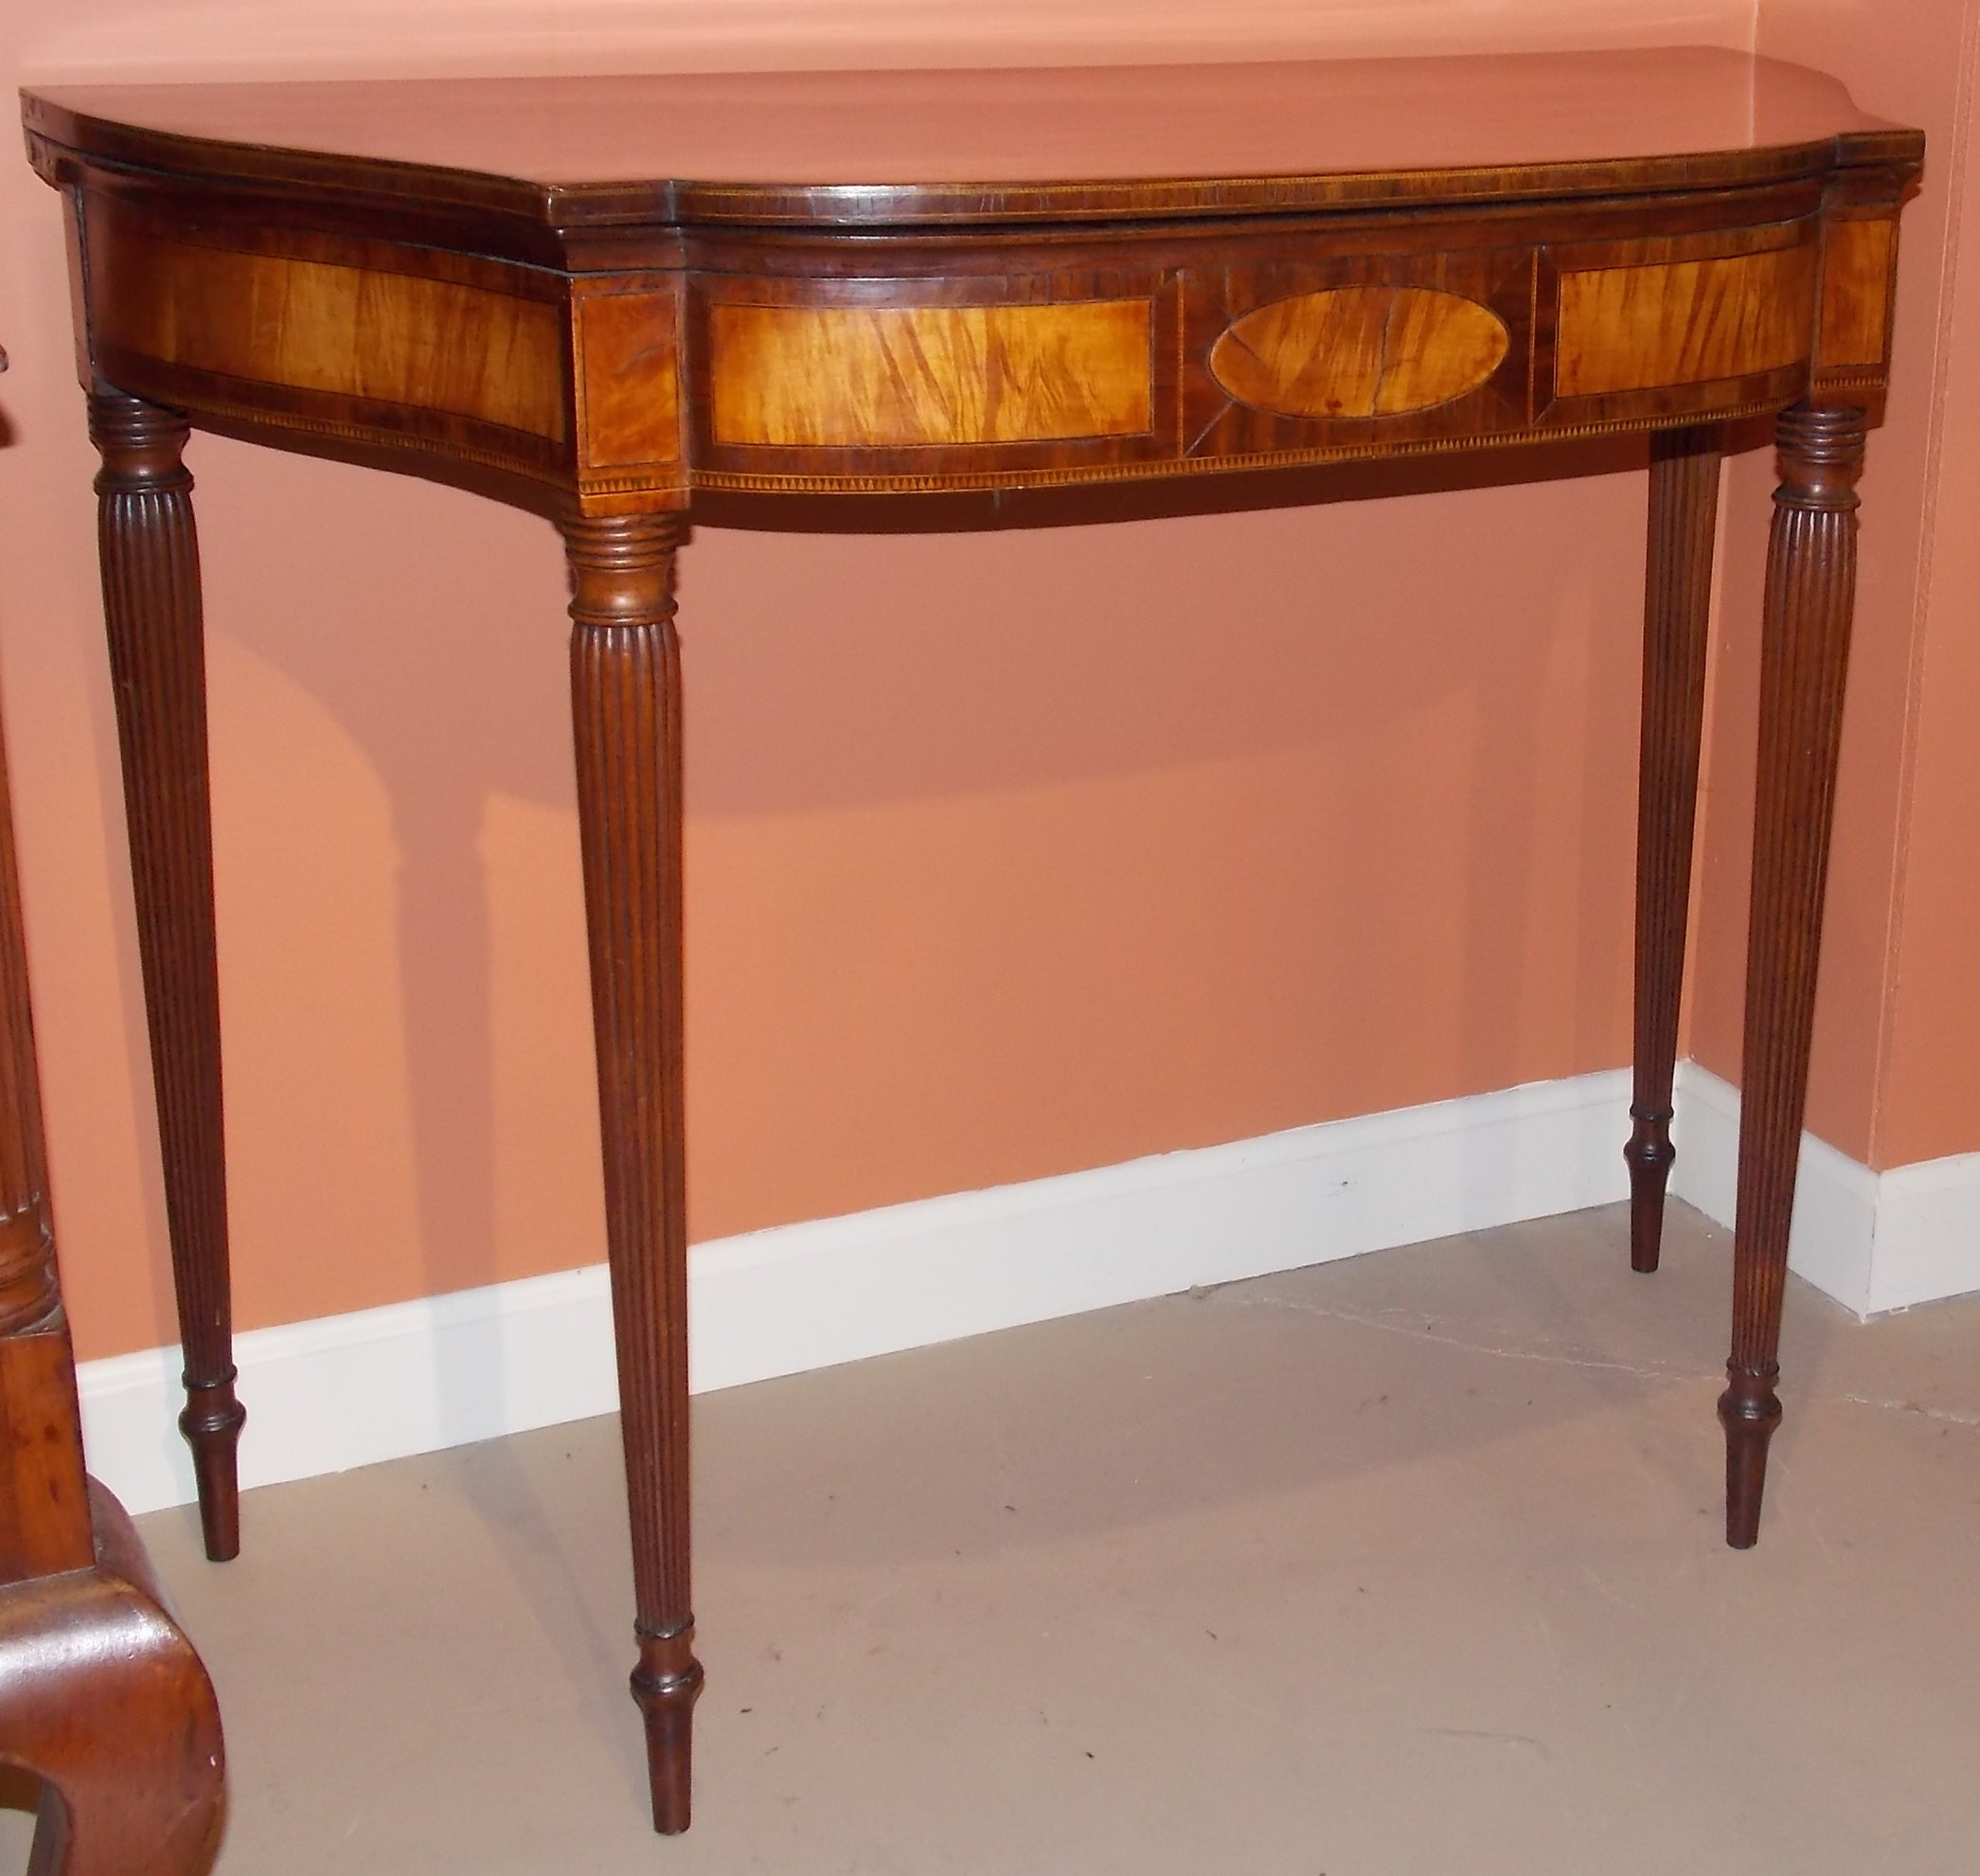 Early 19th c. Seymour Federal Serpentine Card Table